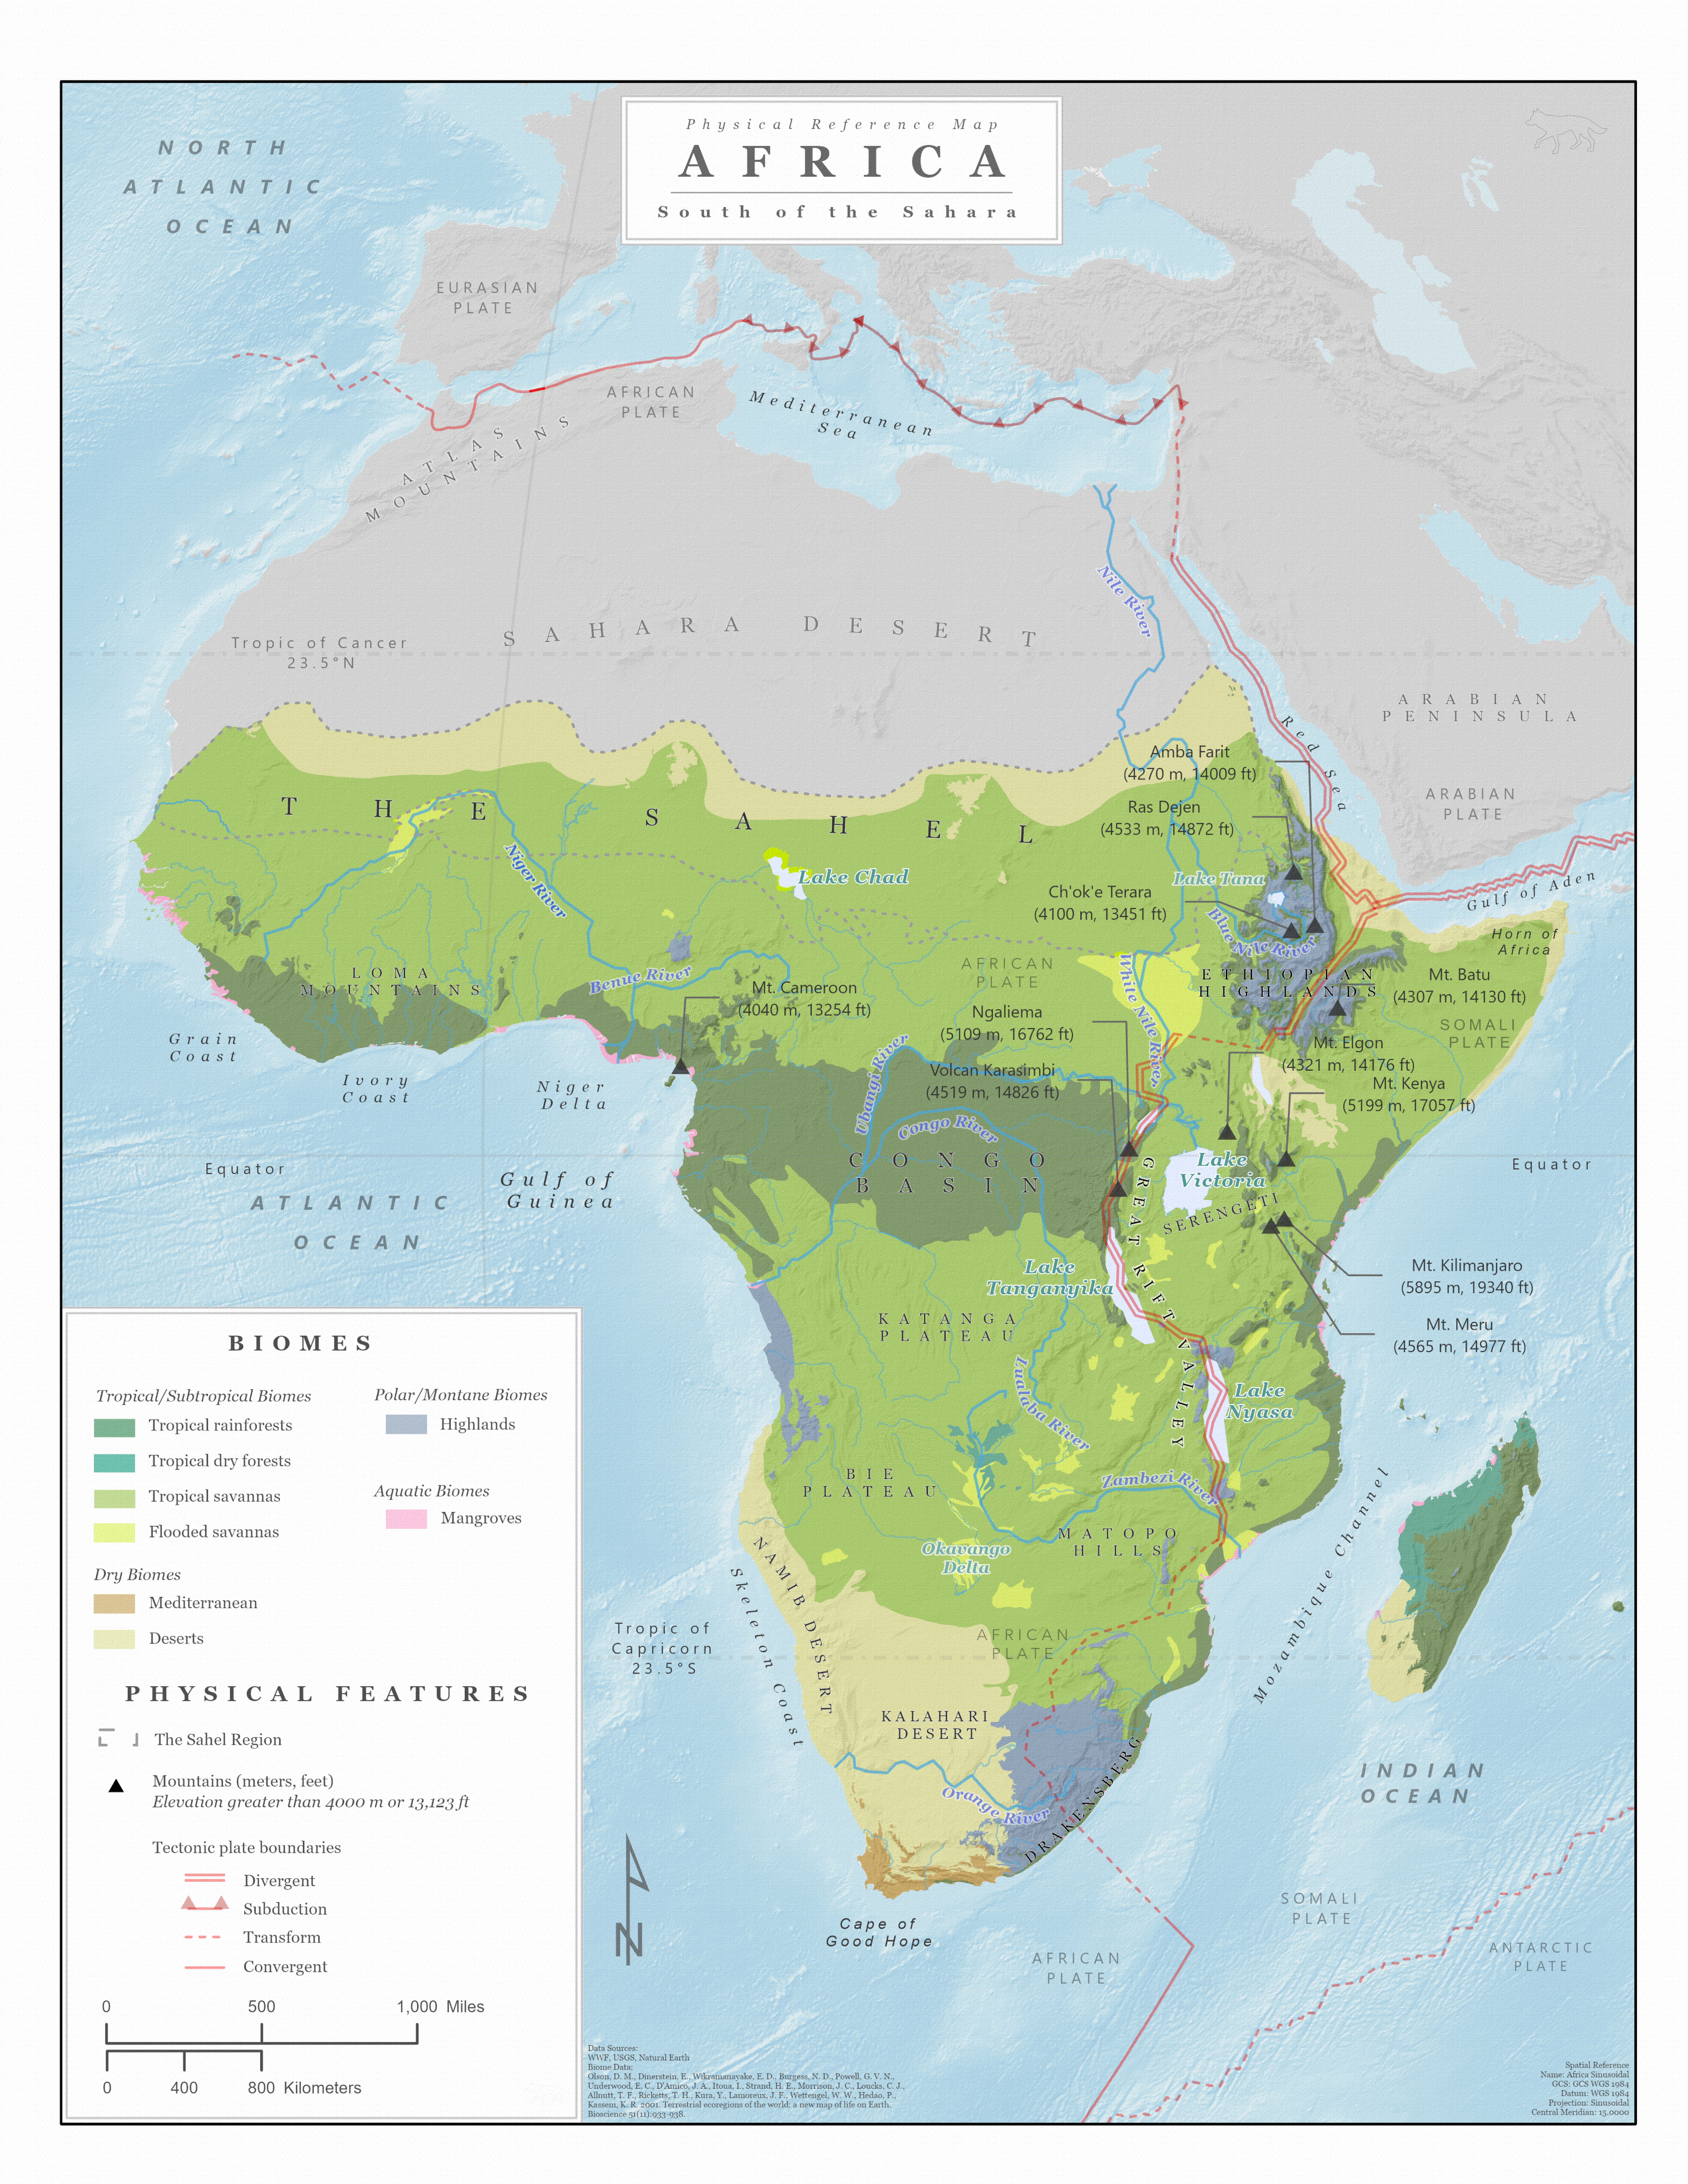 Biome and physical features map of Africa South of the Sahara